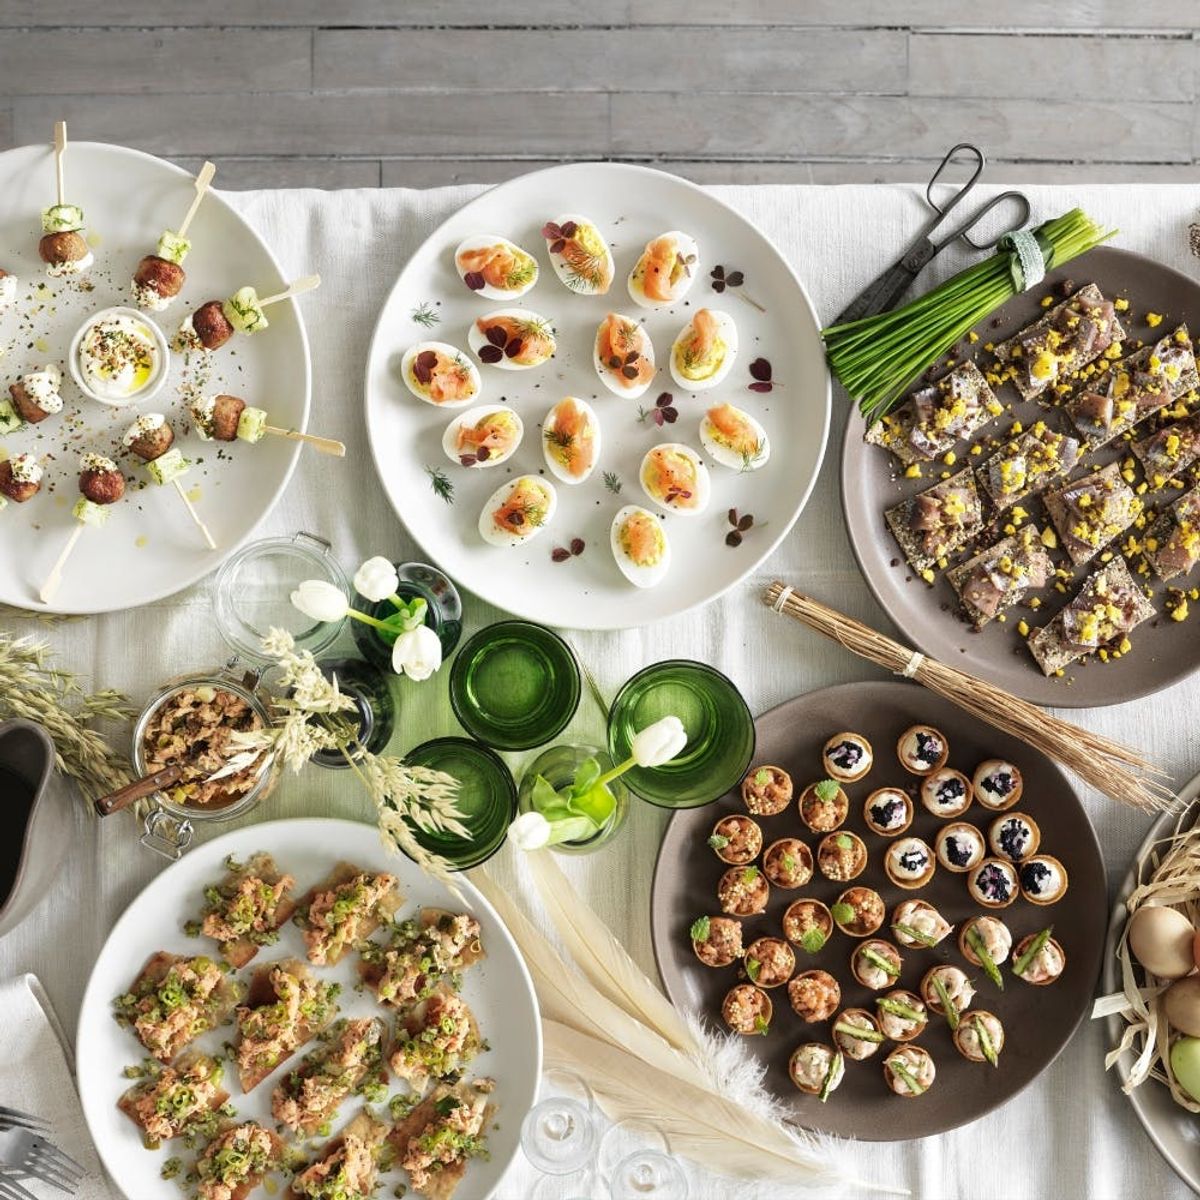 IKEA Wants to Help You Welcome Spring With a Drool-Worthy Swedish Easter Påskbord (+ a Salmon and Avocado Salad Recipe)